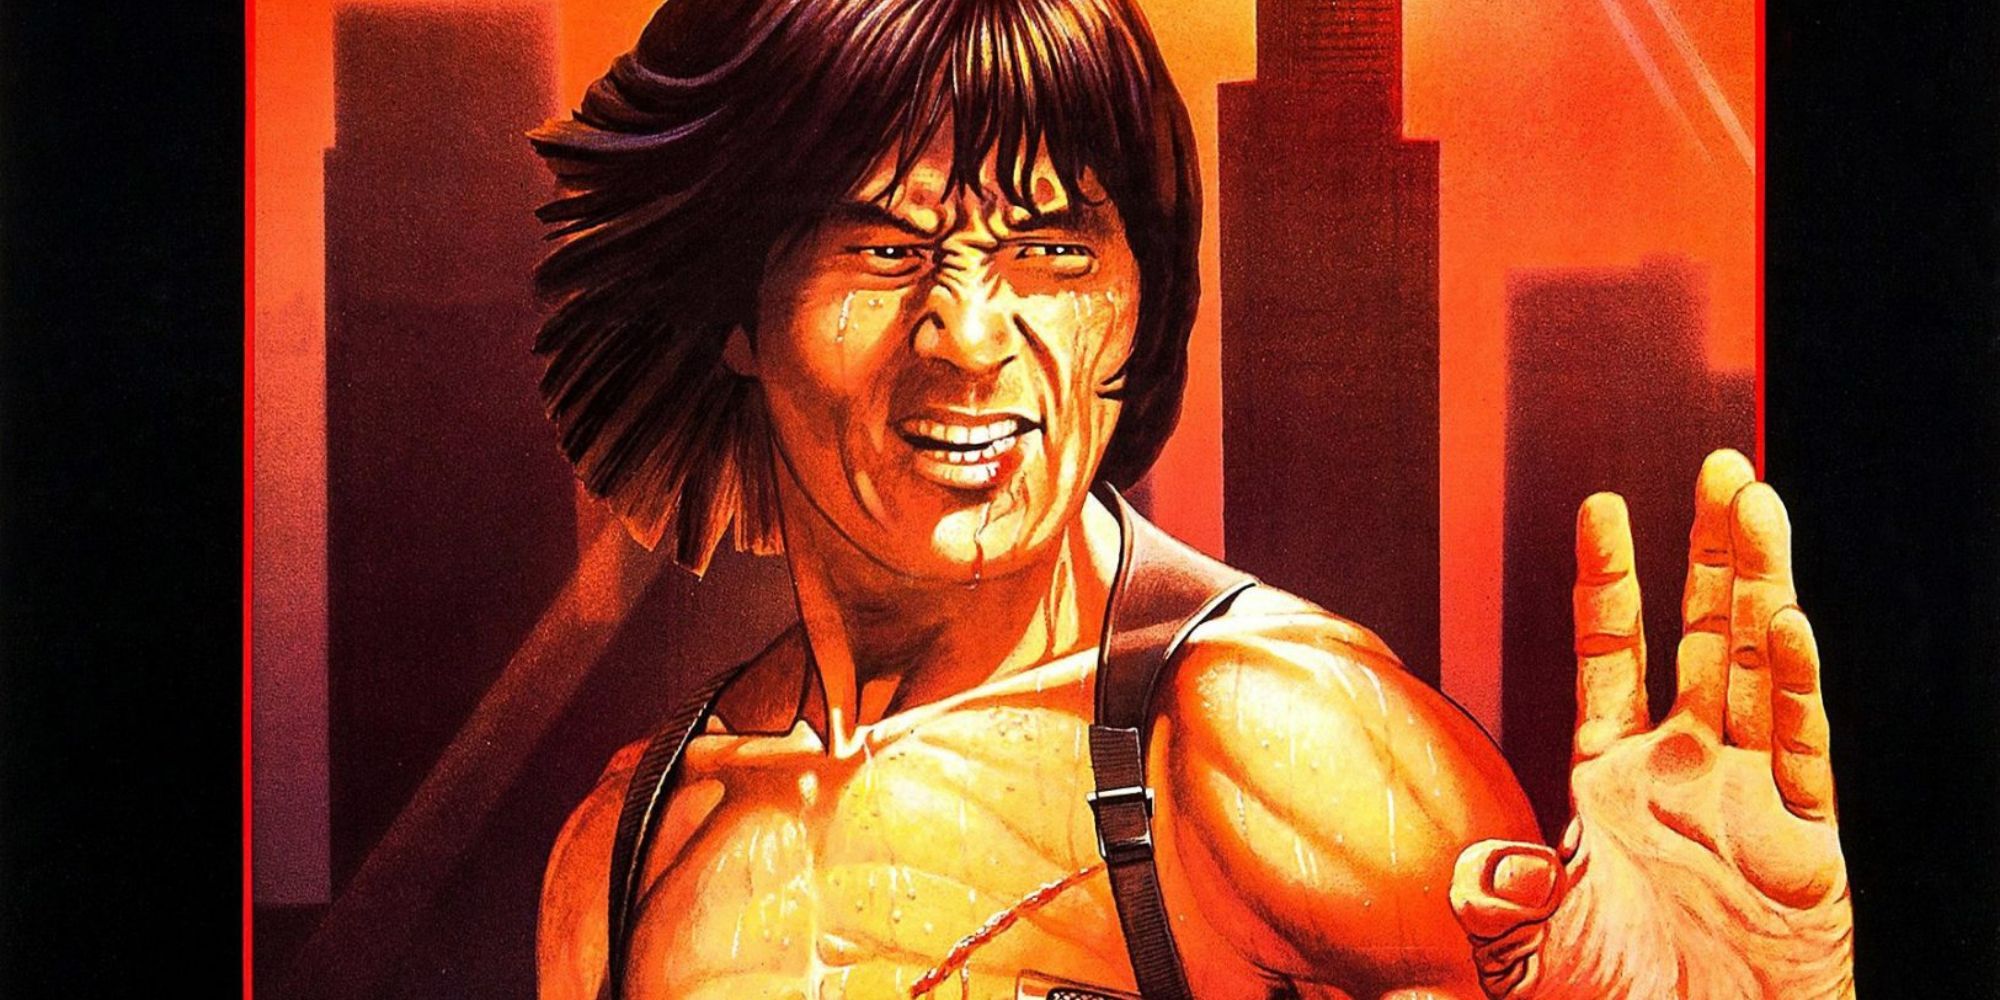 Jackie Chan on the theatrical poster for The Protector